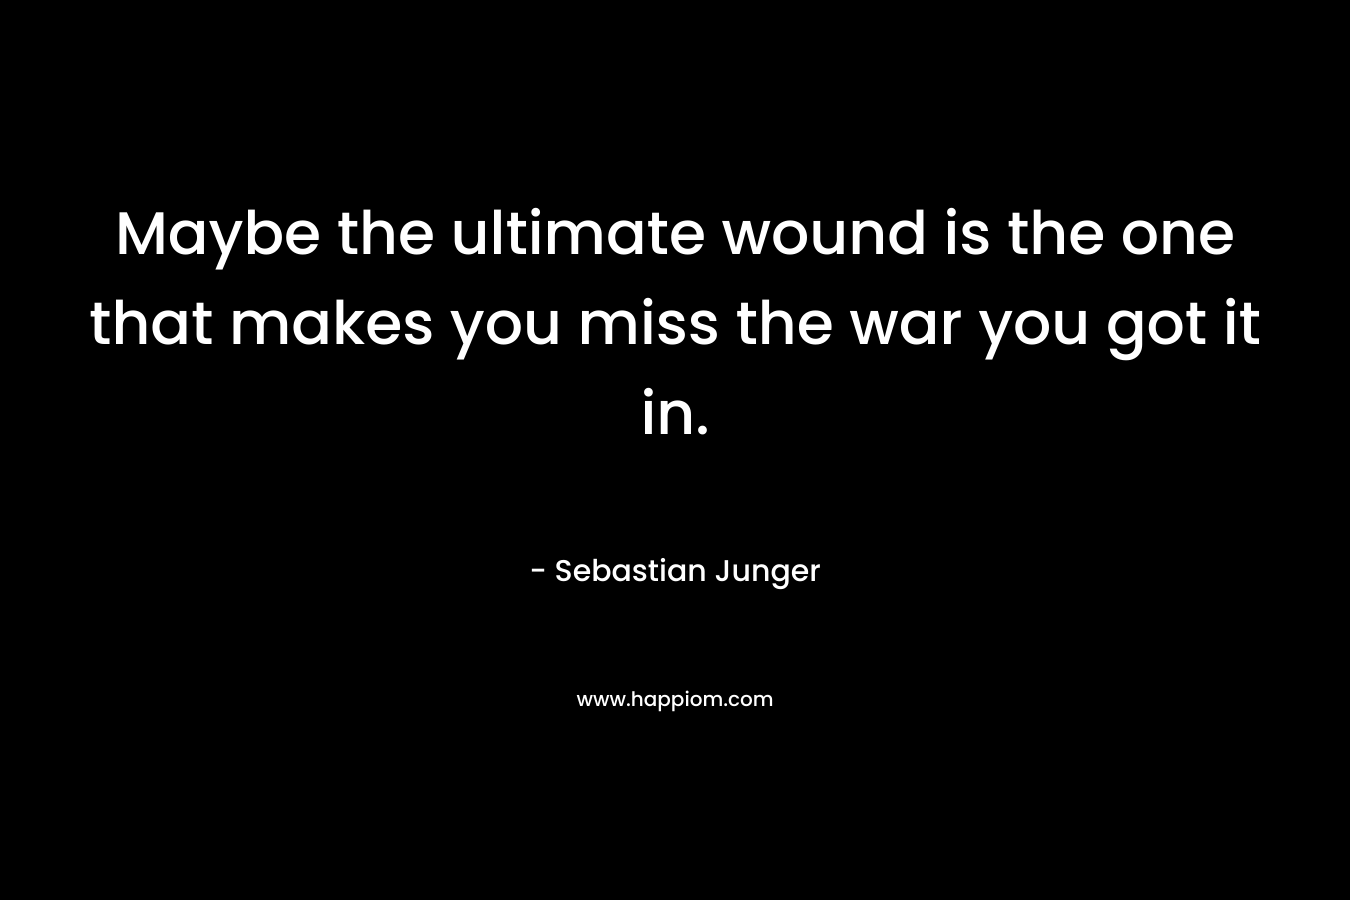 Maybe the ultimate wound is the one that makes you miss the war you got it in. – Sebastian Junger